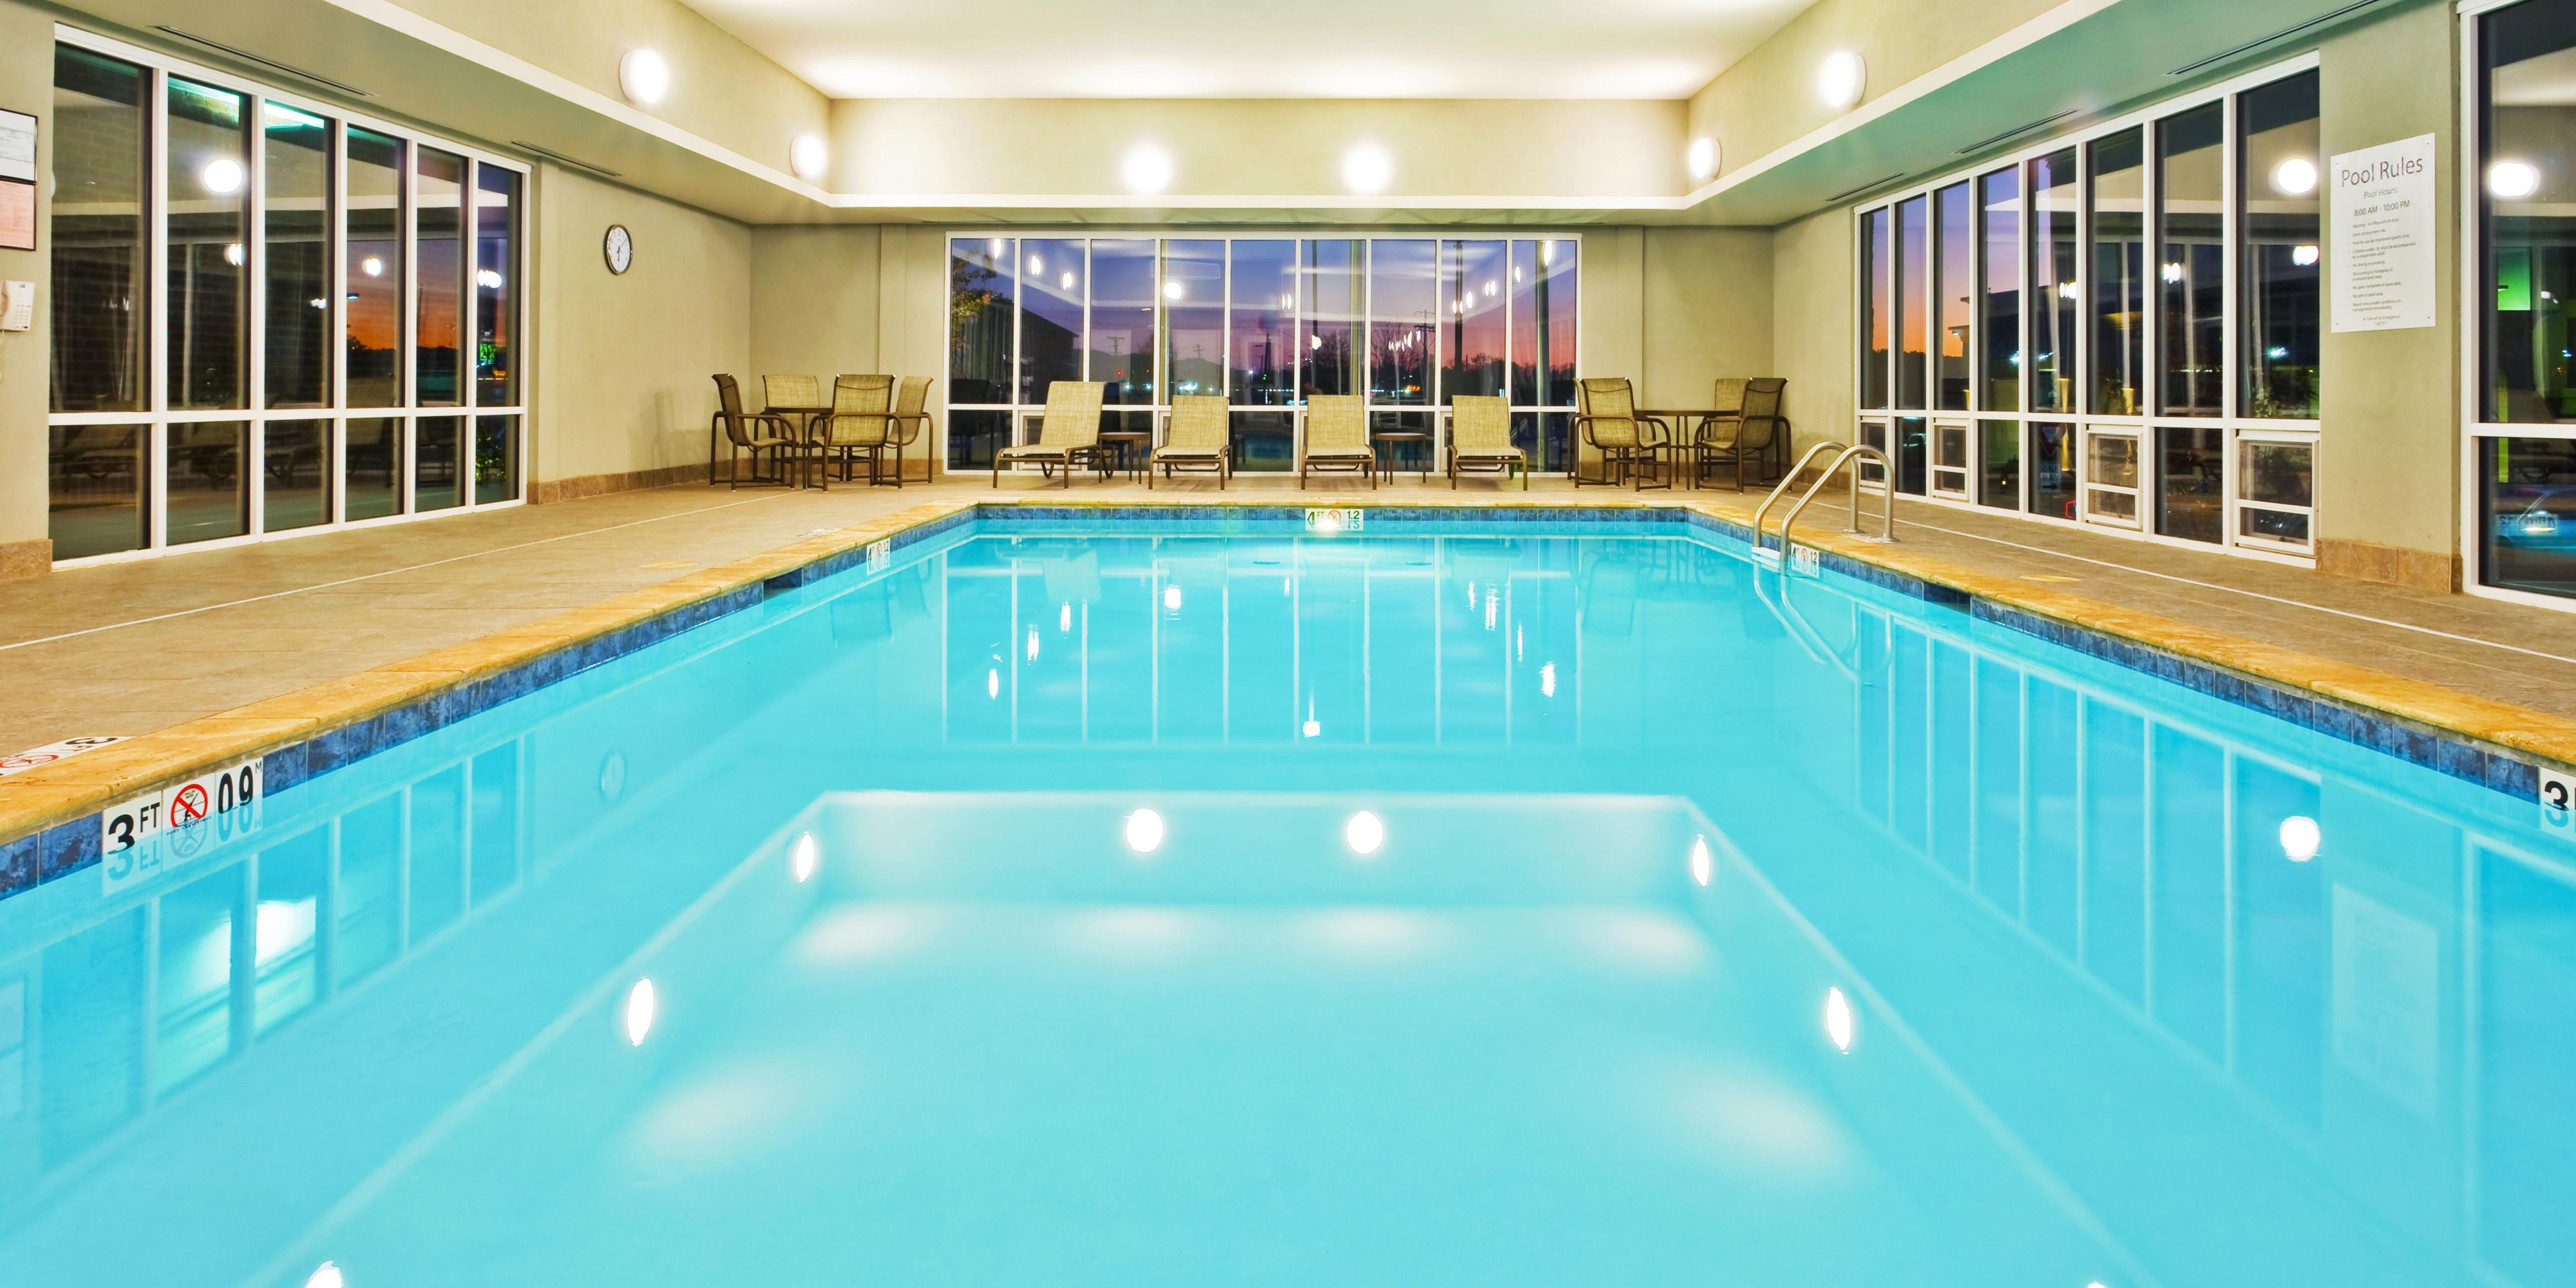 Looking for an indoor pool for fitness or to tire out the kiddos?  Look no further than the Holiday inn Express Ooltewah!  Book online or call the hotel to secure your room!